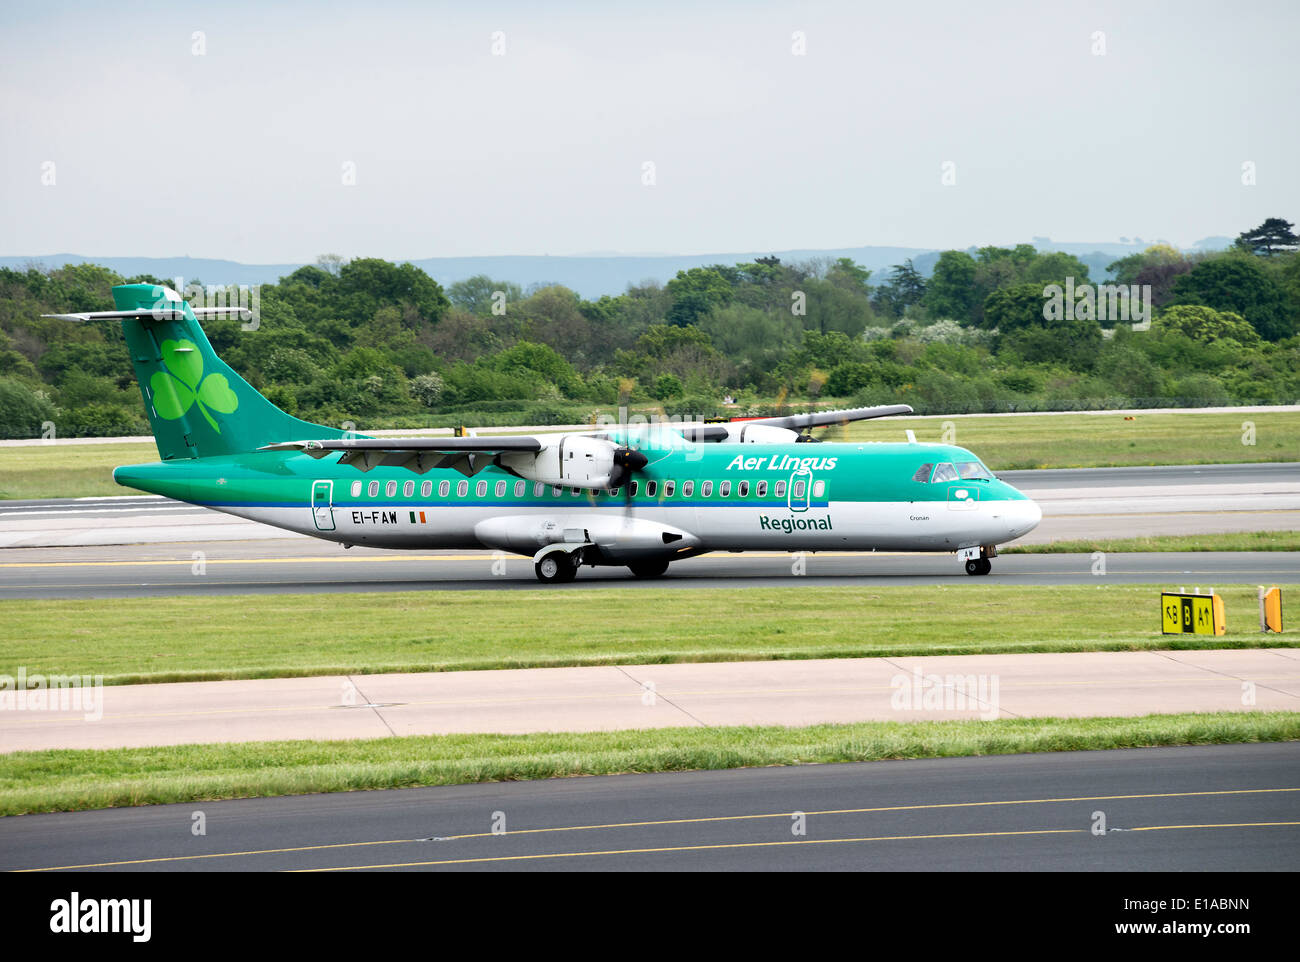 Aer Arann Operating in Aer Lingus Regional Airlines Colours ATR 72-600 Airliner EI-FAW Taxiing at Manchester Airport England UK Stock Photo